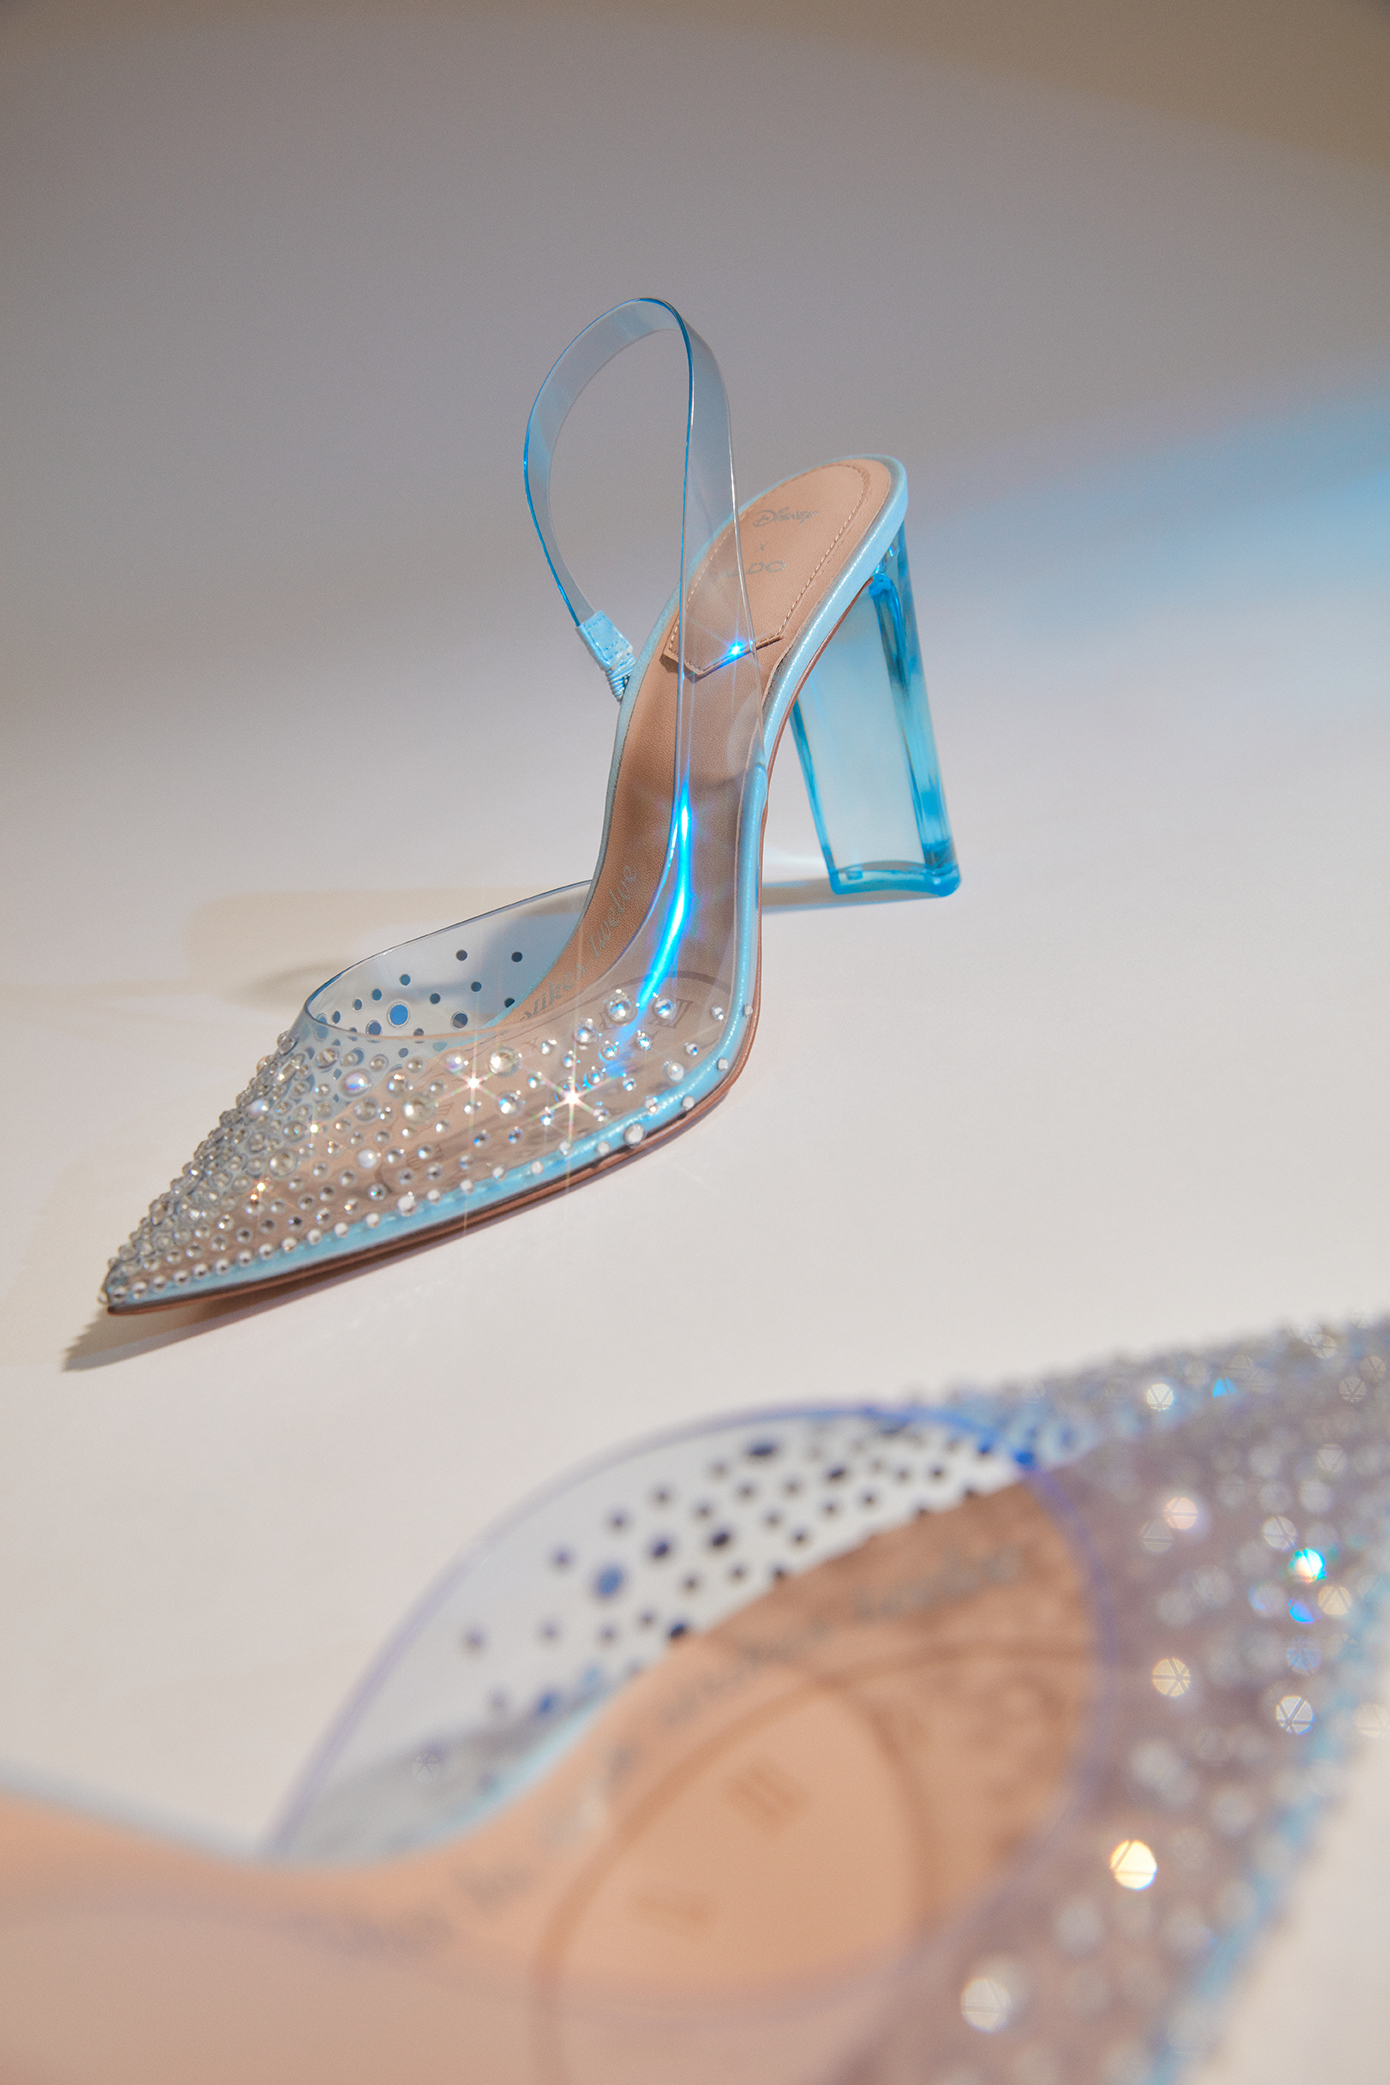 Aldo x Cinderella Shoes Are Inspired by a Disney Classic: Release